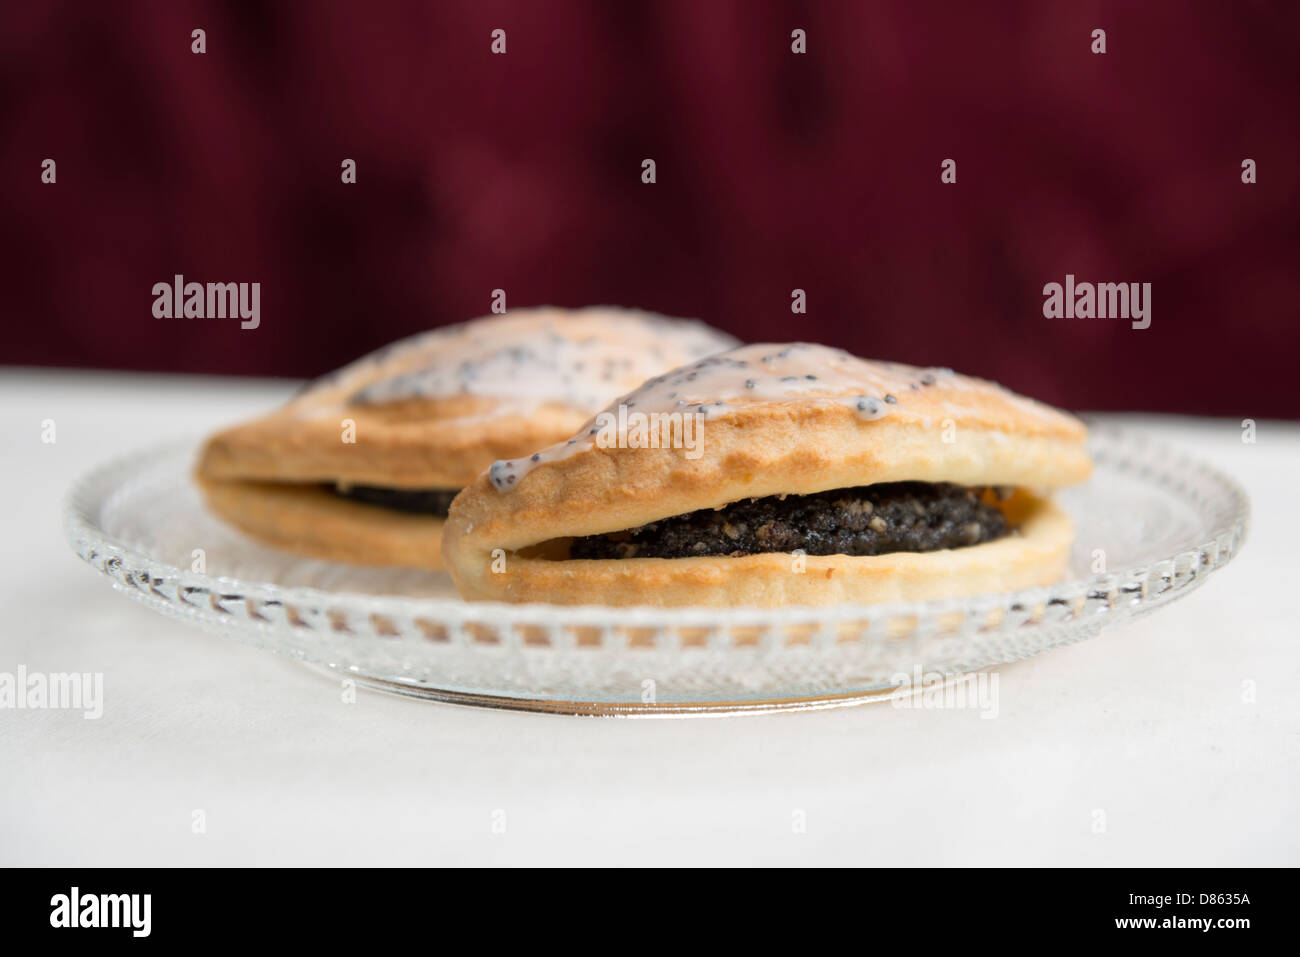 Poppy pastry bag on a glass plate Stock Photo